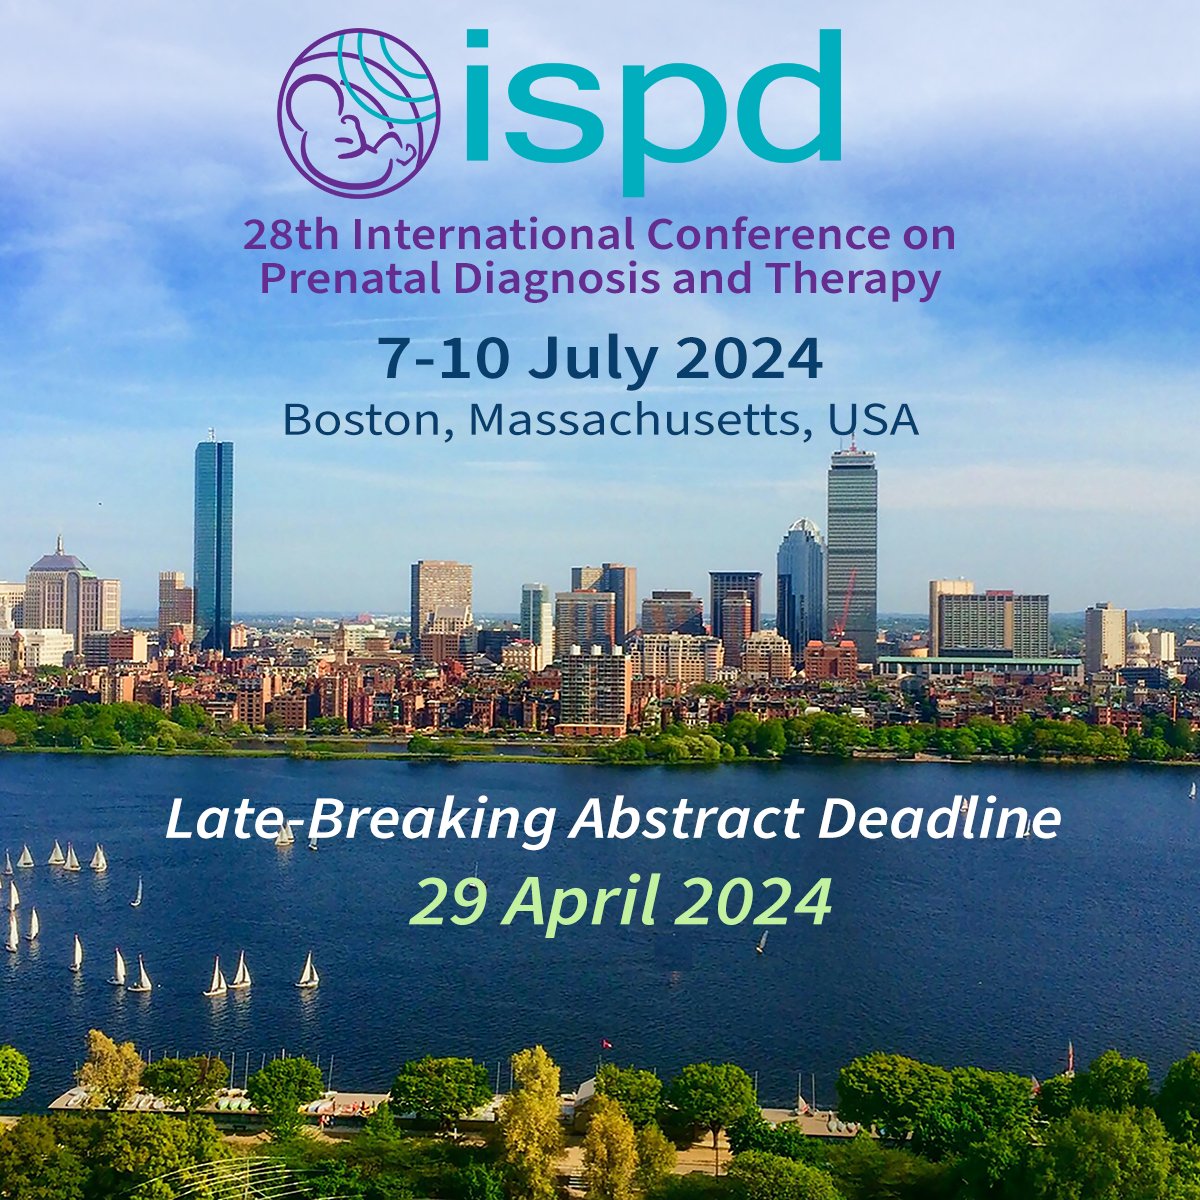 Late-breaking abstracts are being accepted for #ISPD2024! Share your latest research with colleagues in Boston this July - review all the submission details at ispdhome.org/ISPD2024/Abstr…. 📆 Submission Deadline: Monday, 29 April 2024